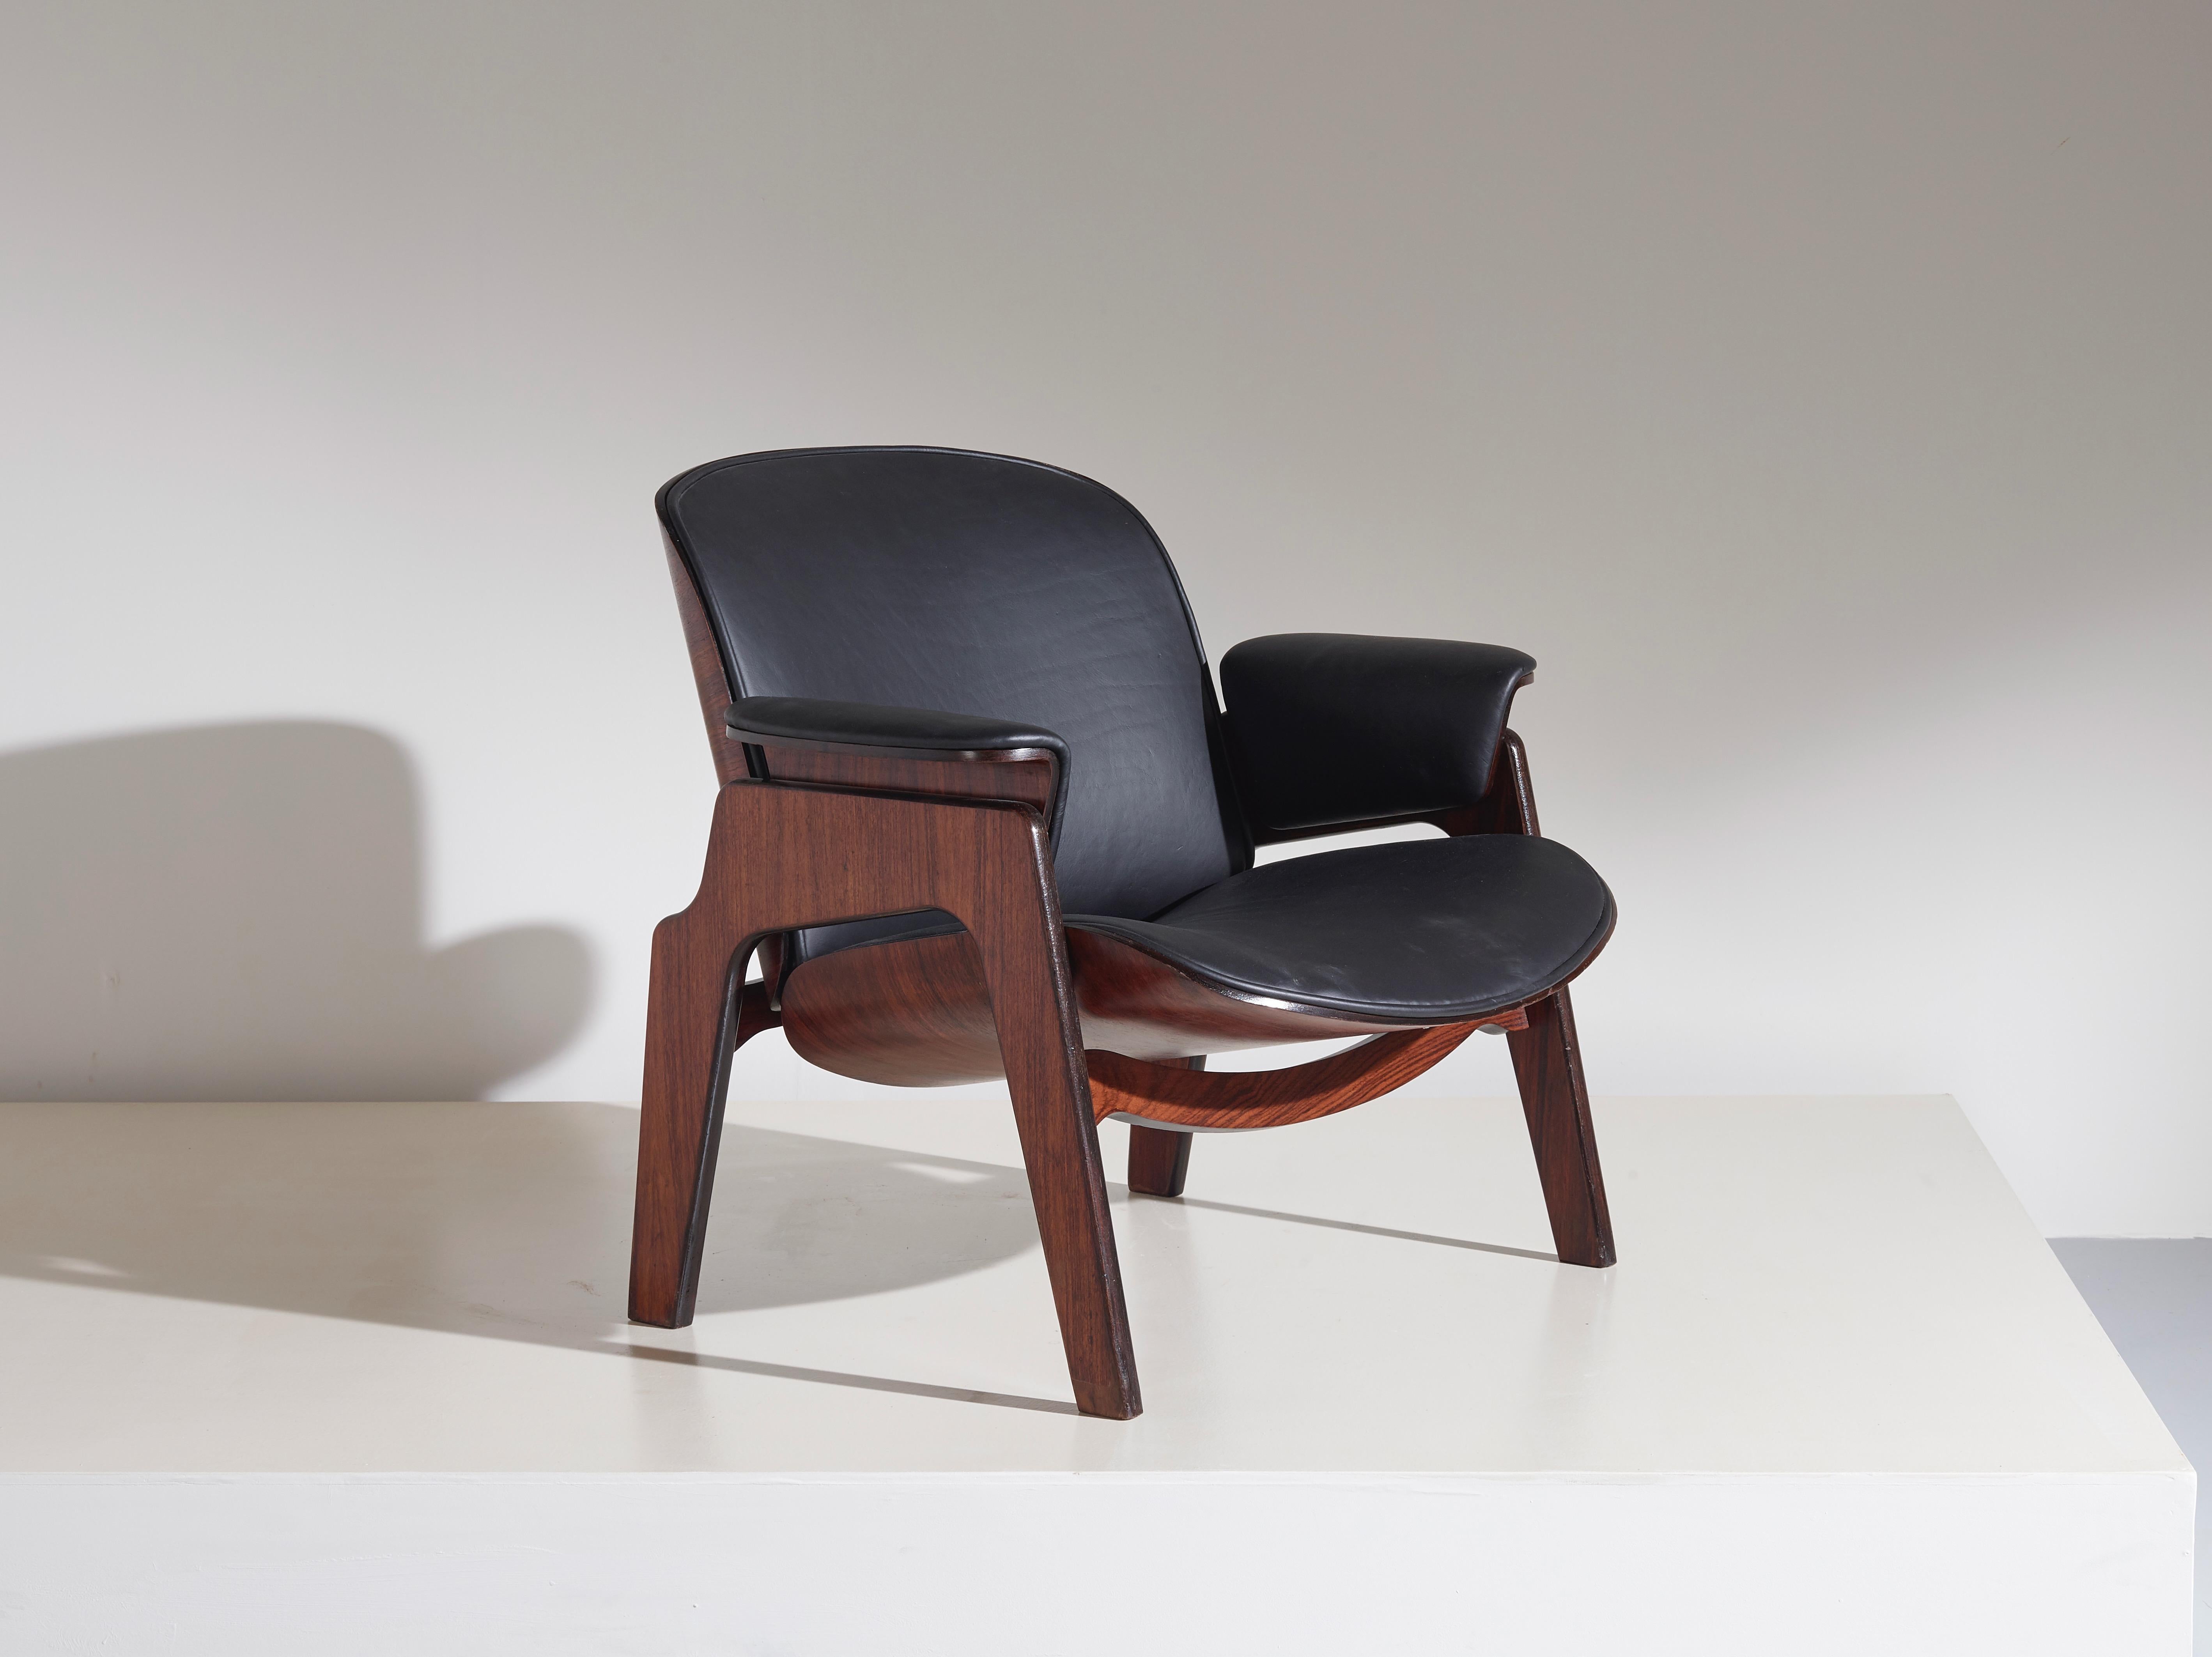 A beautiful armchair with rosewood veneered frame and new high quality leather upholstery designed by Ico Parisi and manufactured by MiM Roma in the ‘60s. Signed with applied manufacturer’s metal label to underside.

Dimensions: 77 x 85 x 74 cm